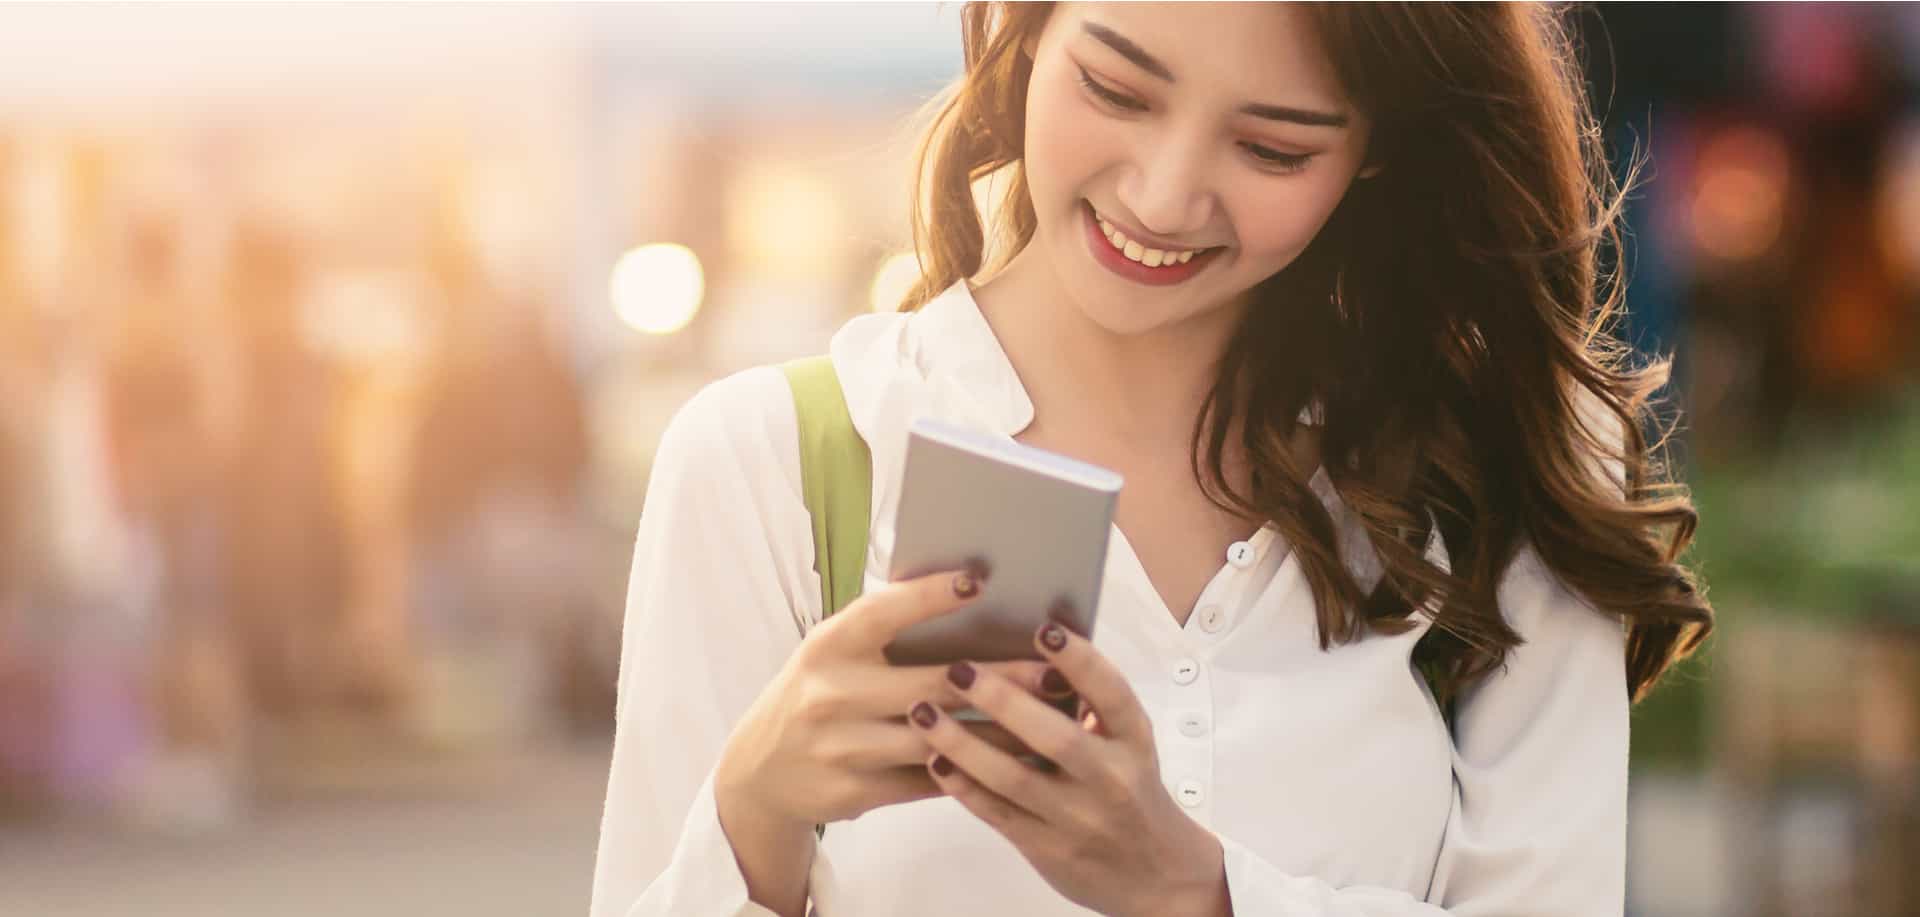 A woman smiling at her smartphone while using an SMS keyword service.